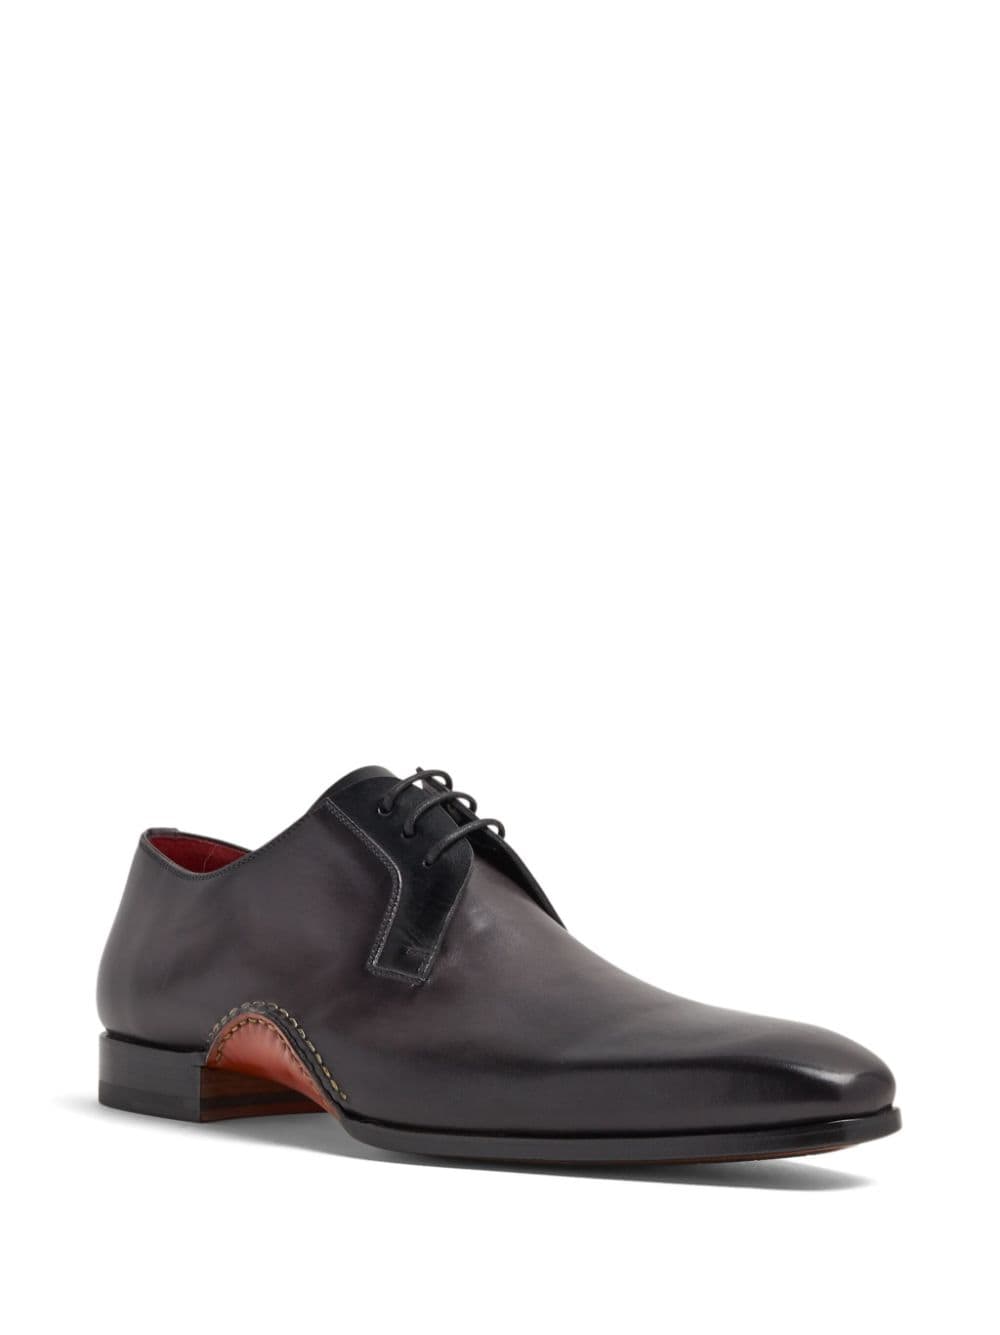 Image 2 of Magnanni lace-up leather Oxford shoes